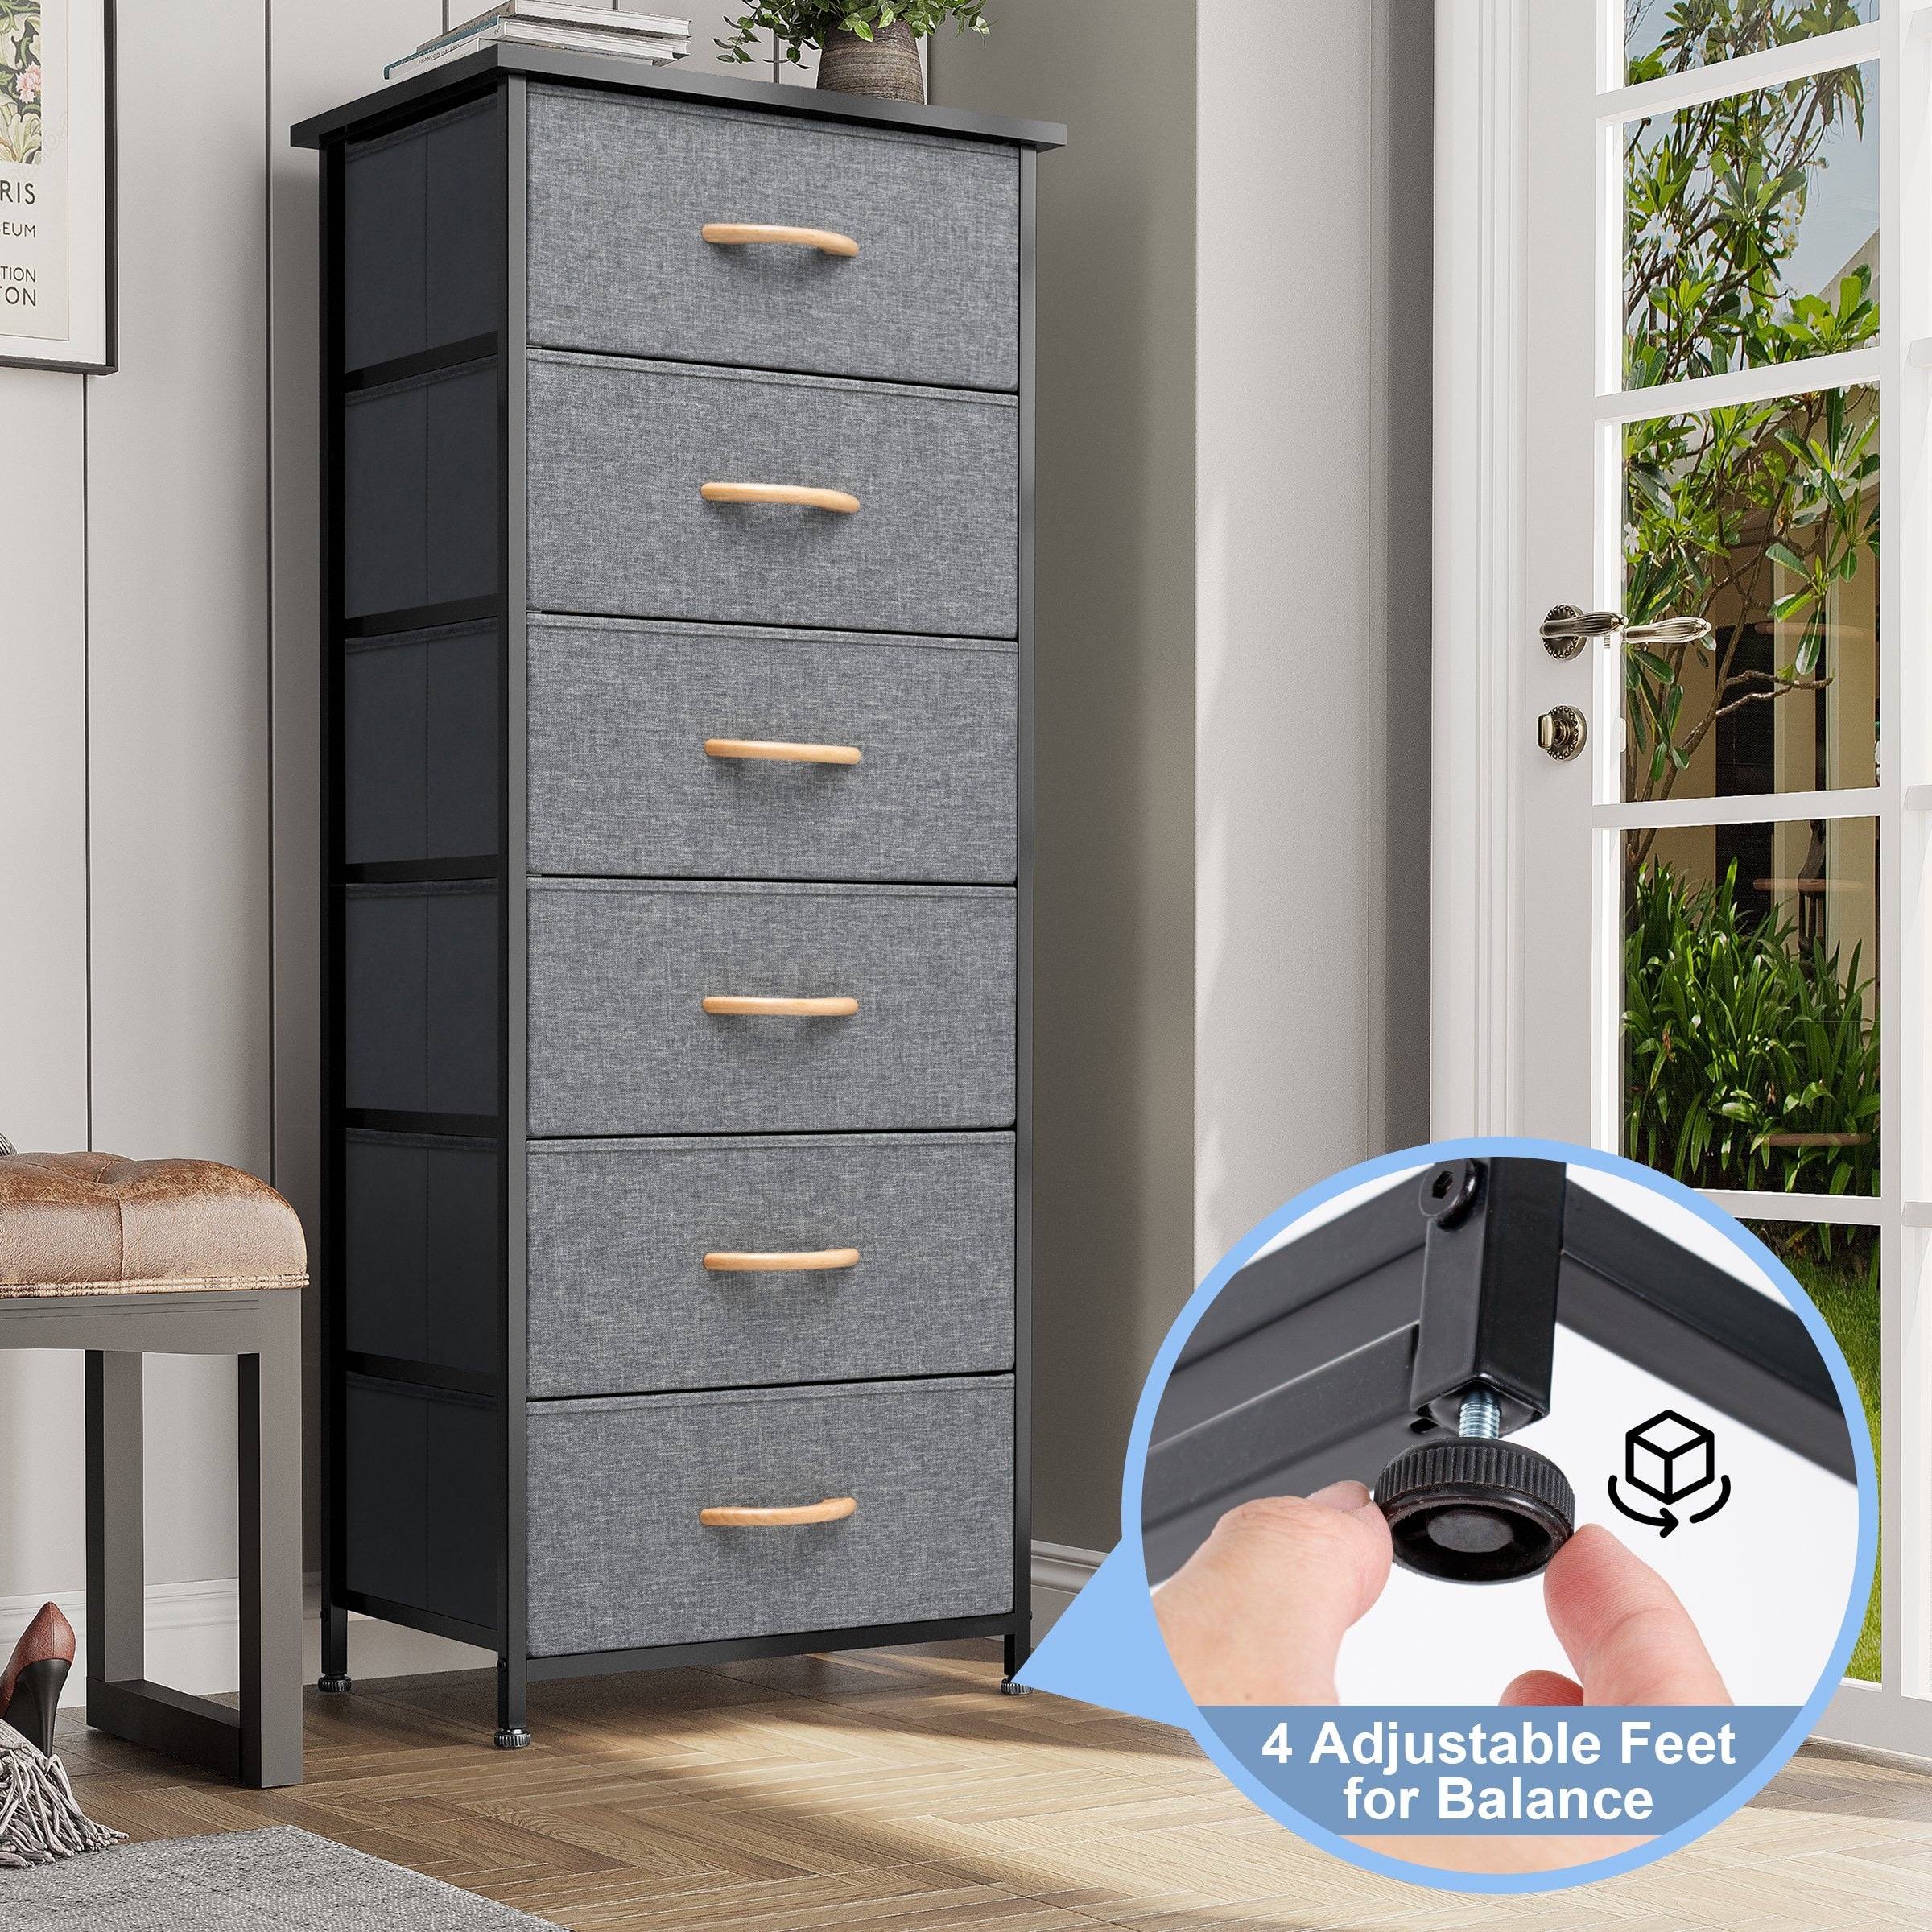 https://ak1.ostkcdn.com/images/products/is/images/direct/e271d6dc84e46628115895e0353051a4c0e4eb8d/Crestlive-Products-Vertical-Dresser-Storage-Tower-with-Wood-Top.jpg